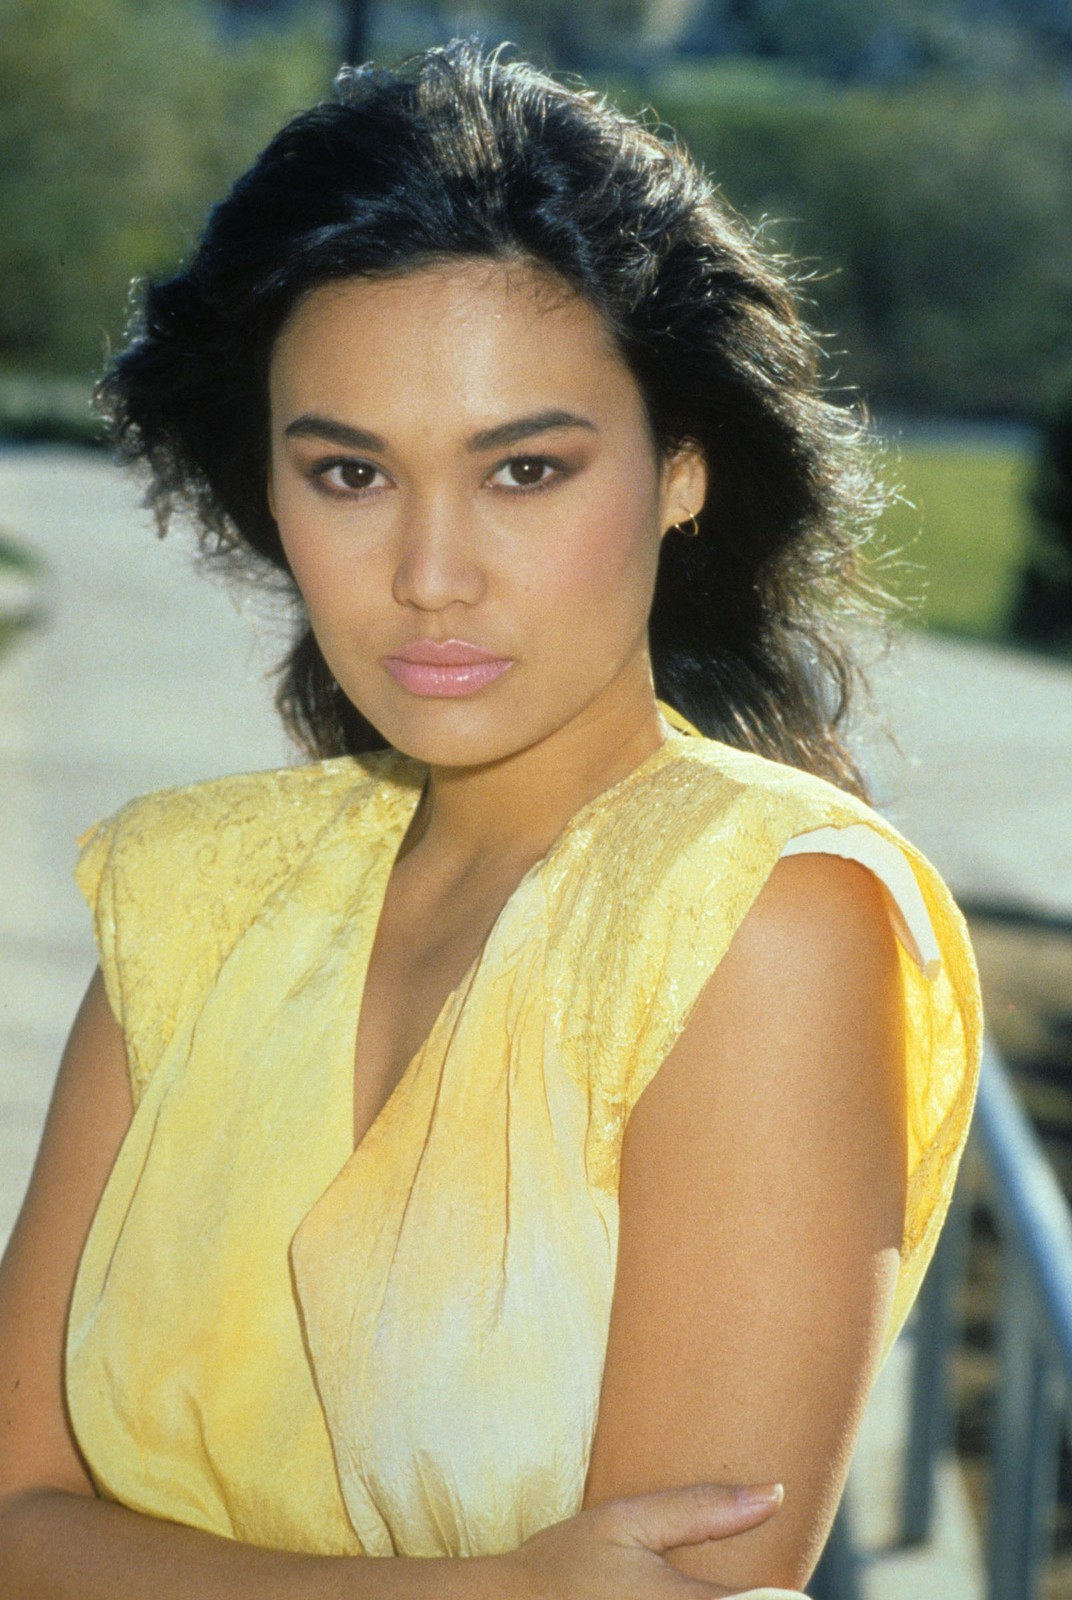 Tia carrere back in the day